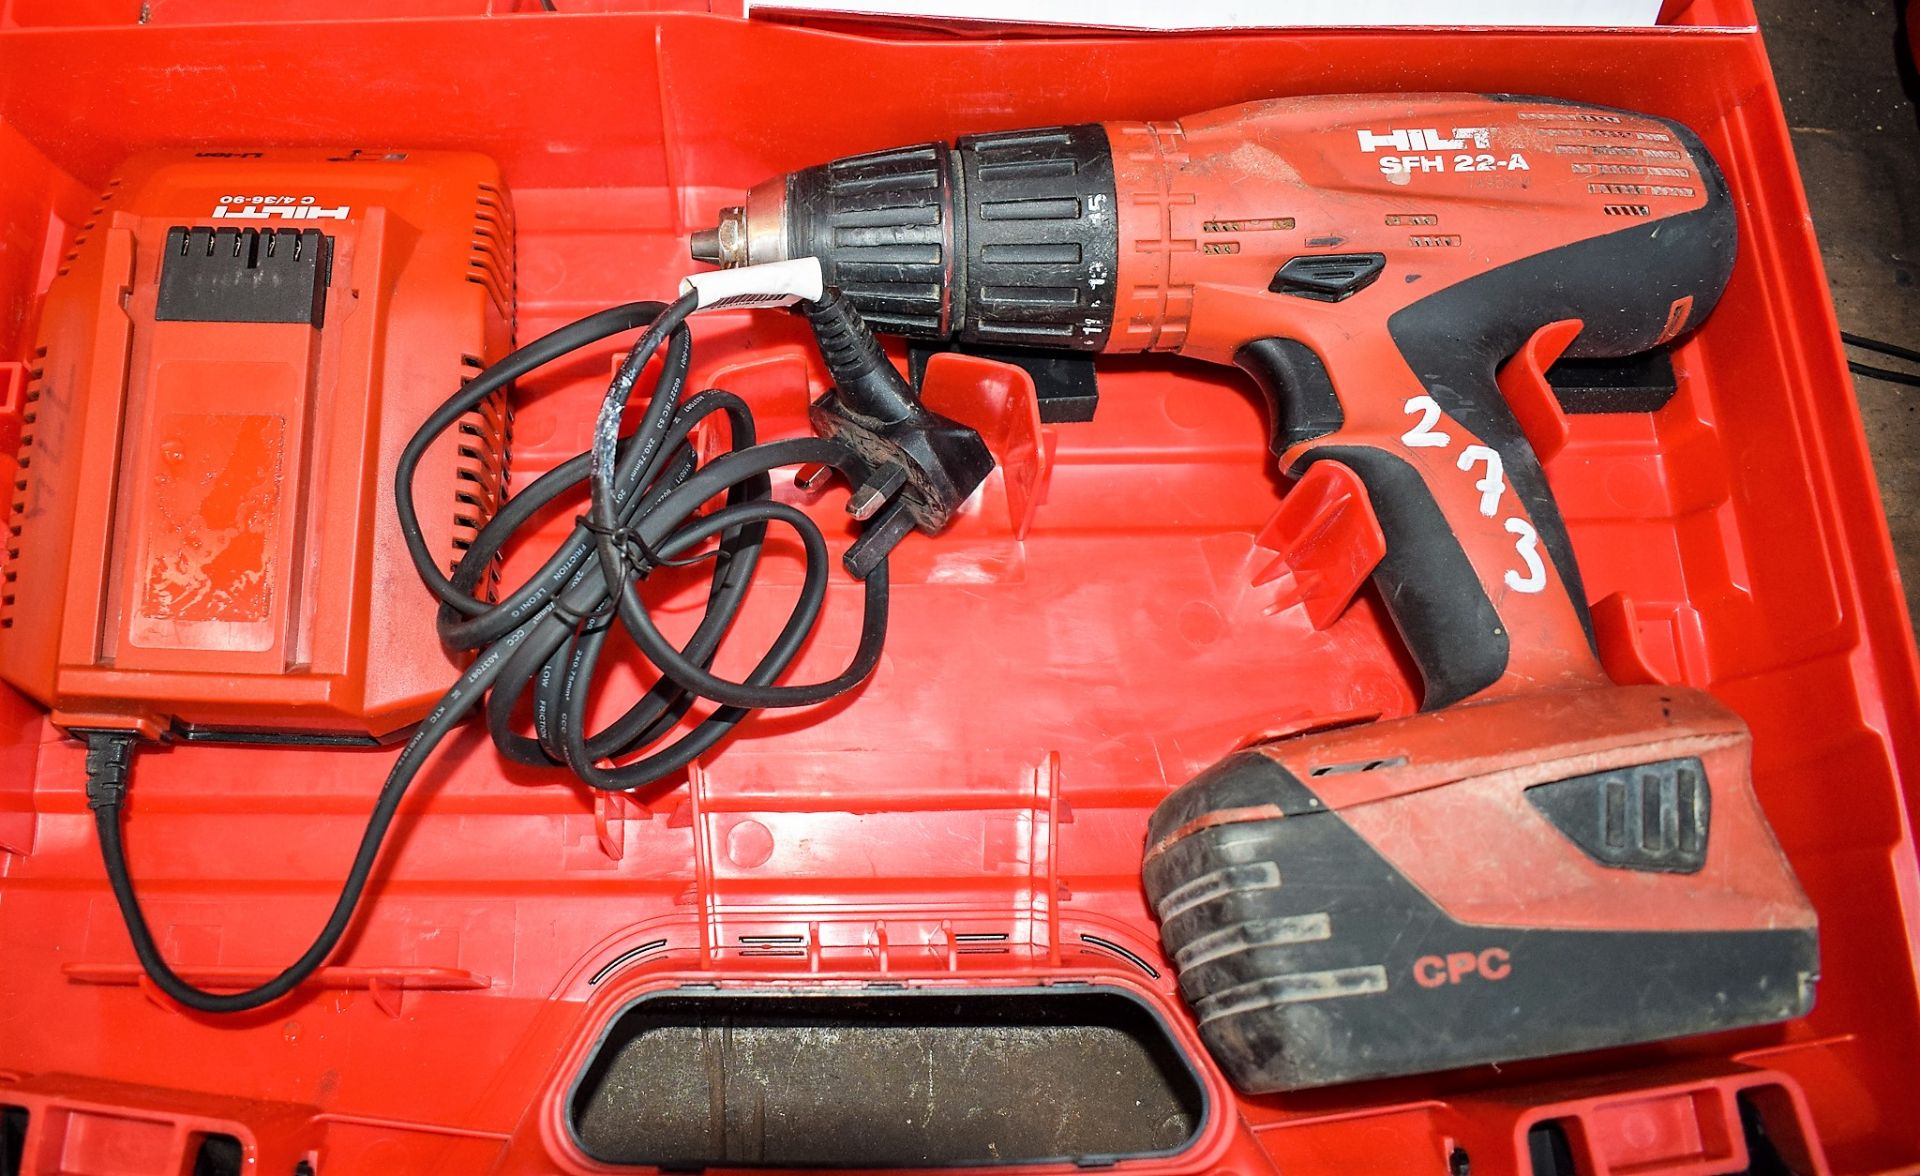 Hilti SFH 22-A 22v cordless power drill c/w charger, battery & carry case A700001